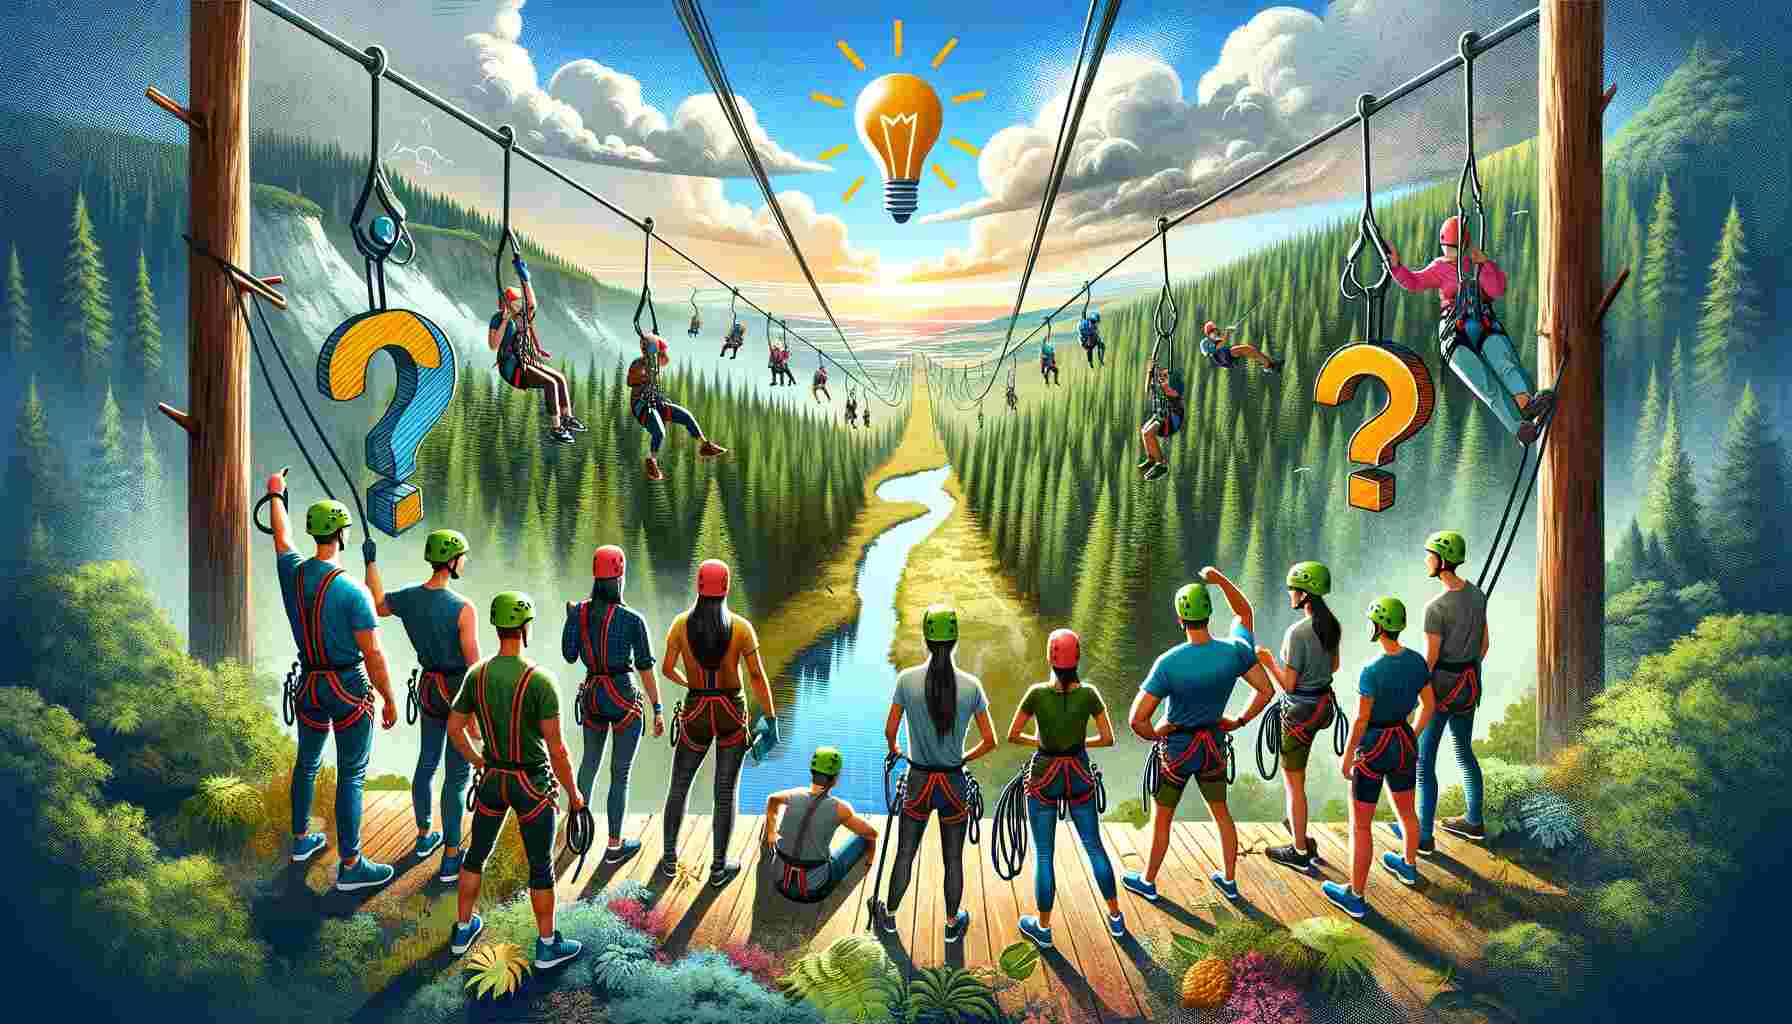 An image depicting a diverse group of people, varying in build and strength, preparing to zipline in a scenic forest. They wear helmets and harnesses, emphasizing safety and inclusivity. The zipline extends across a lush, green landscape with rolling hills, under a clear blue sky. Subtle icons like question marks and light bulbs are interspersed, symbolizing the myth-busting theme of the article 'Do You Have to Be Strong to Zipline? Unraveling the Myths and Realities', and the enlightenment about the accessibility of ziplining for all.